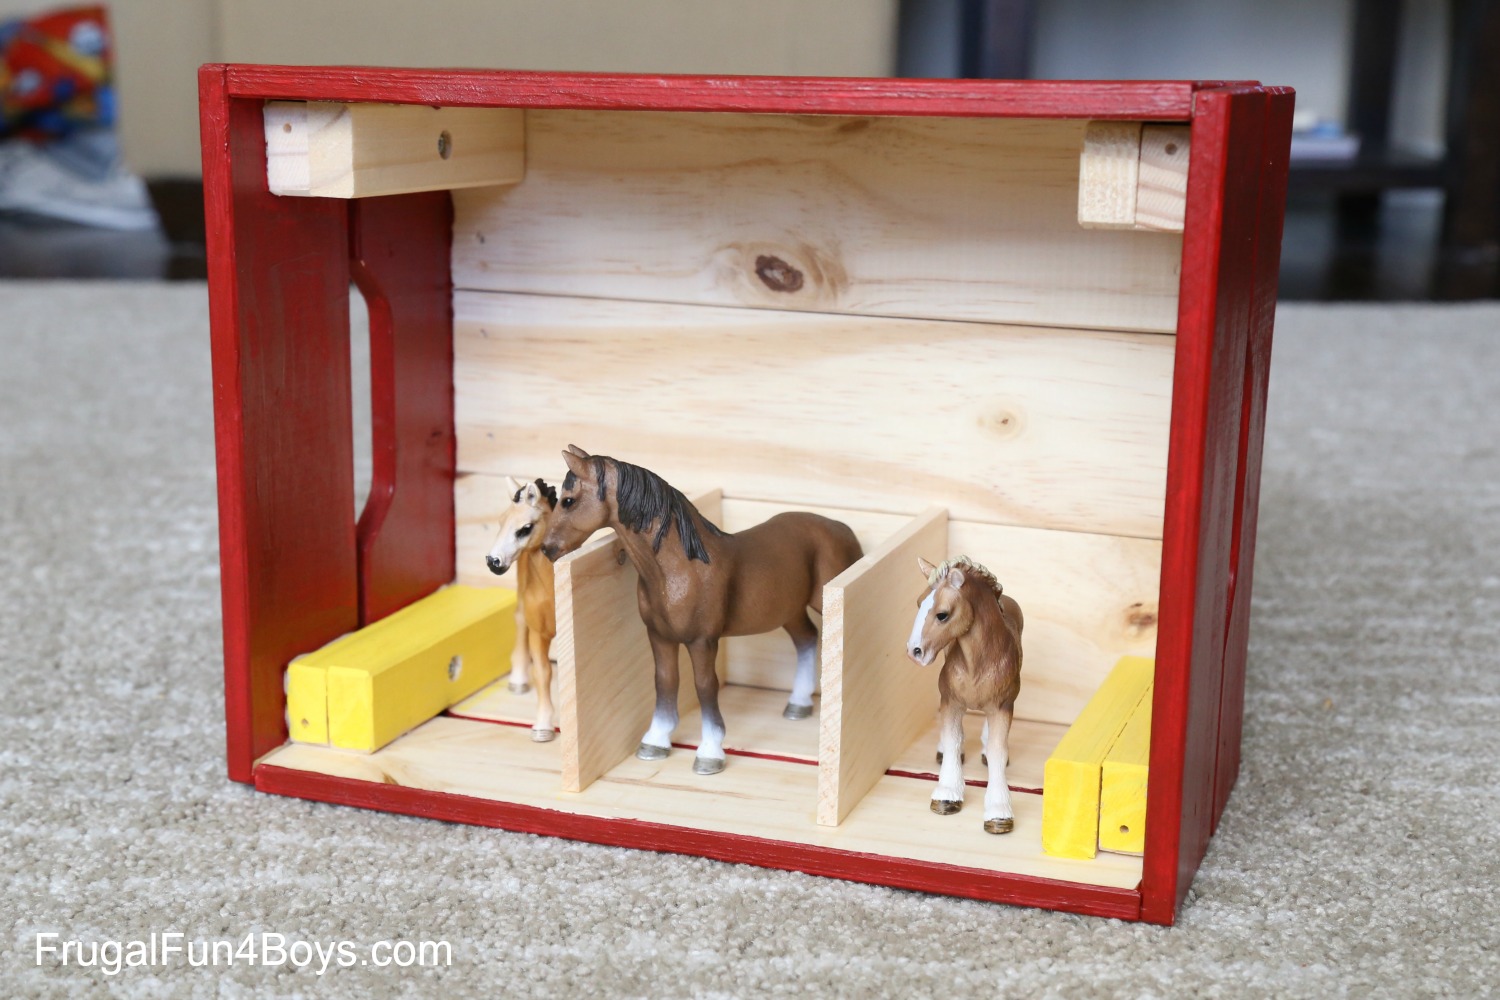 IKEA Crate Horse Stable for Toy Horses